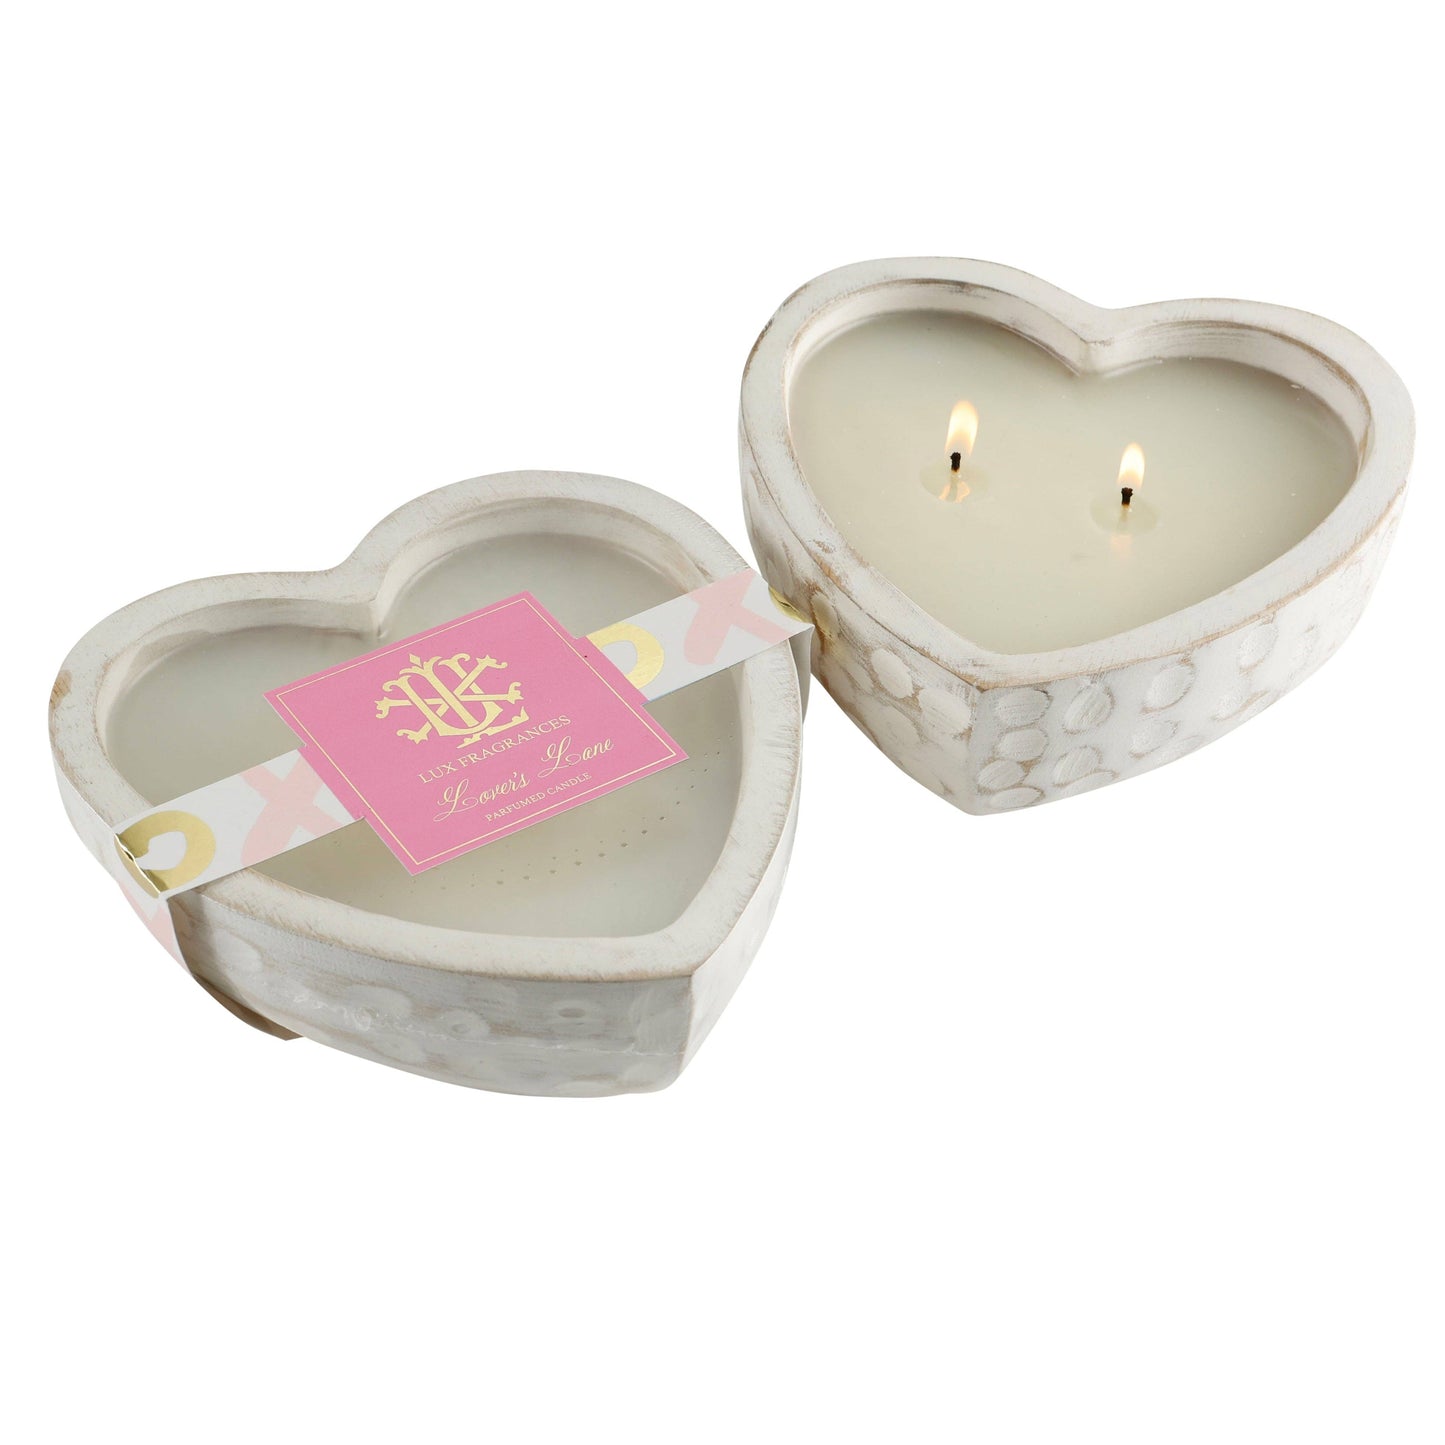 Lover's Lane White Heart Bowl By Lux Fragrances